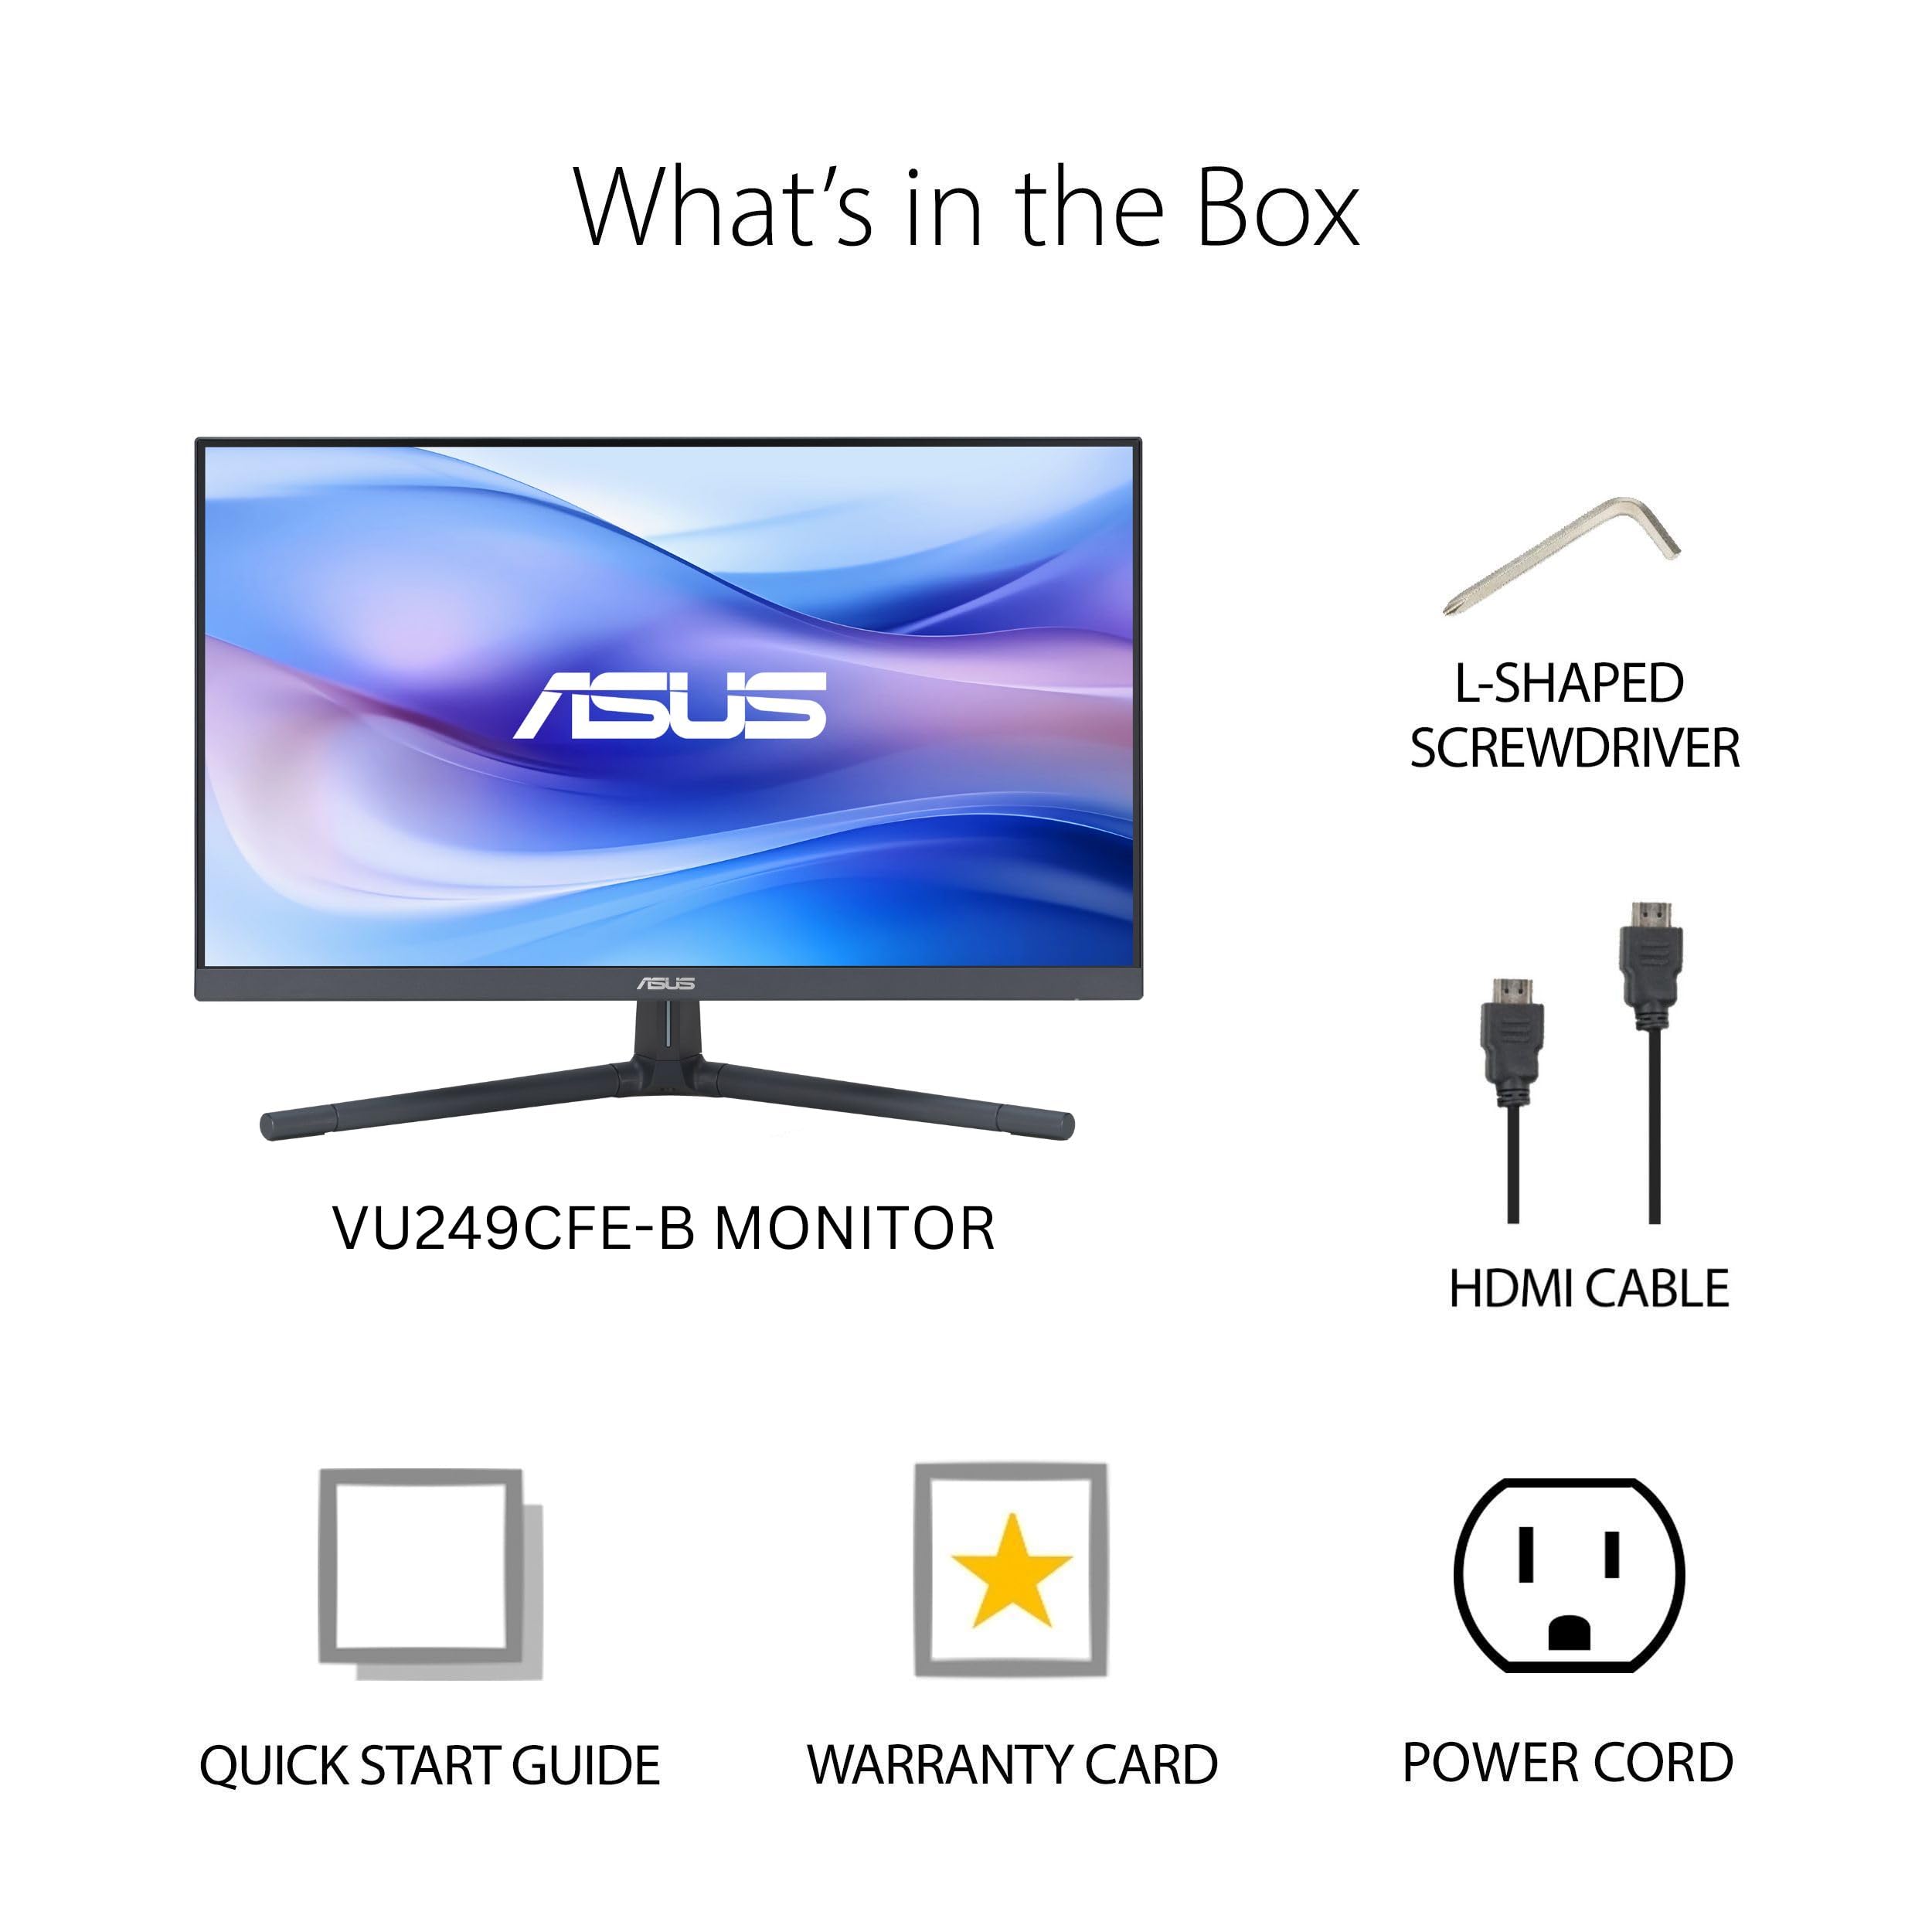 ASUS 24” 1080P Eye Care Monitor (VU249CFE-B) - Full HD, IPS, 100Hz, Adaptive-Sync, USB-C, Ambient Light Sensor, Height Adjustable, Cable Clip, EyeCare+ Technology, 3 Year Warranty, Quiet Blue Color